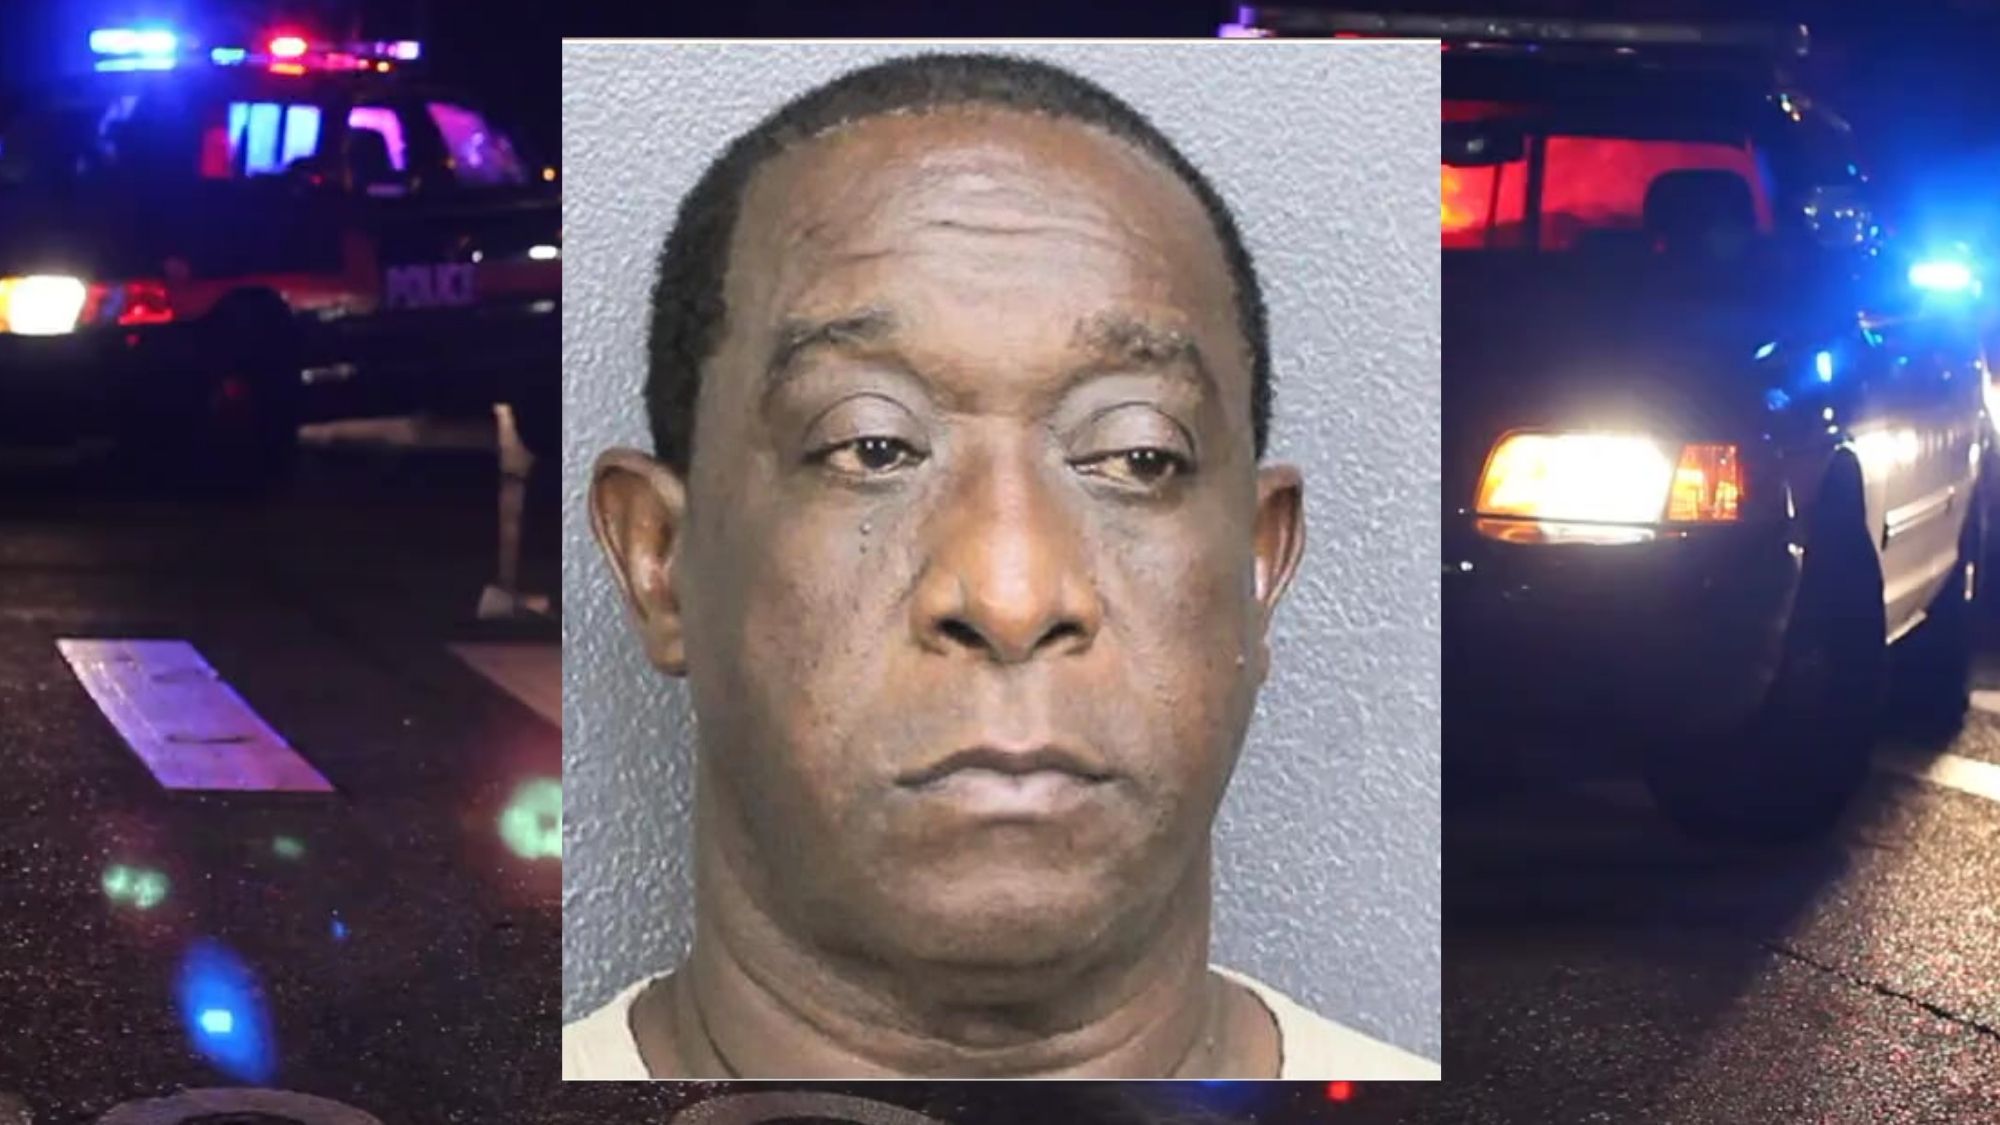 Man Charged with First-Degree Murder in Connection with North Lauderdale Shooting